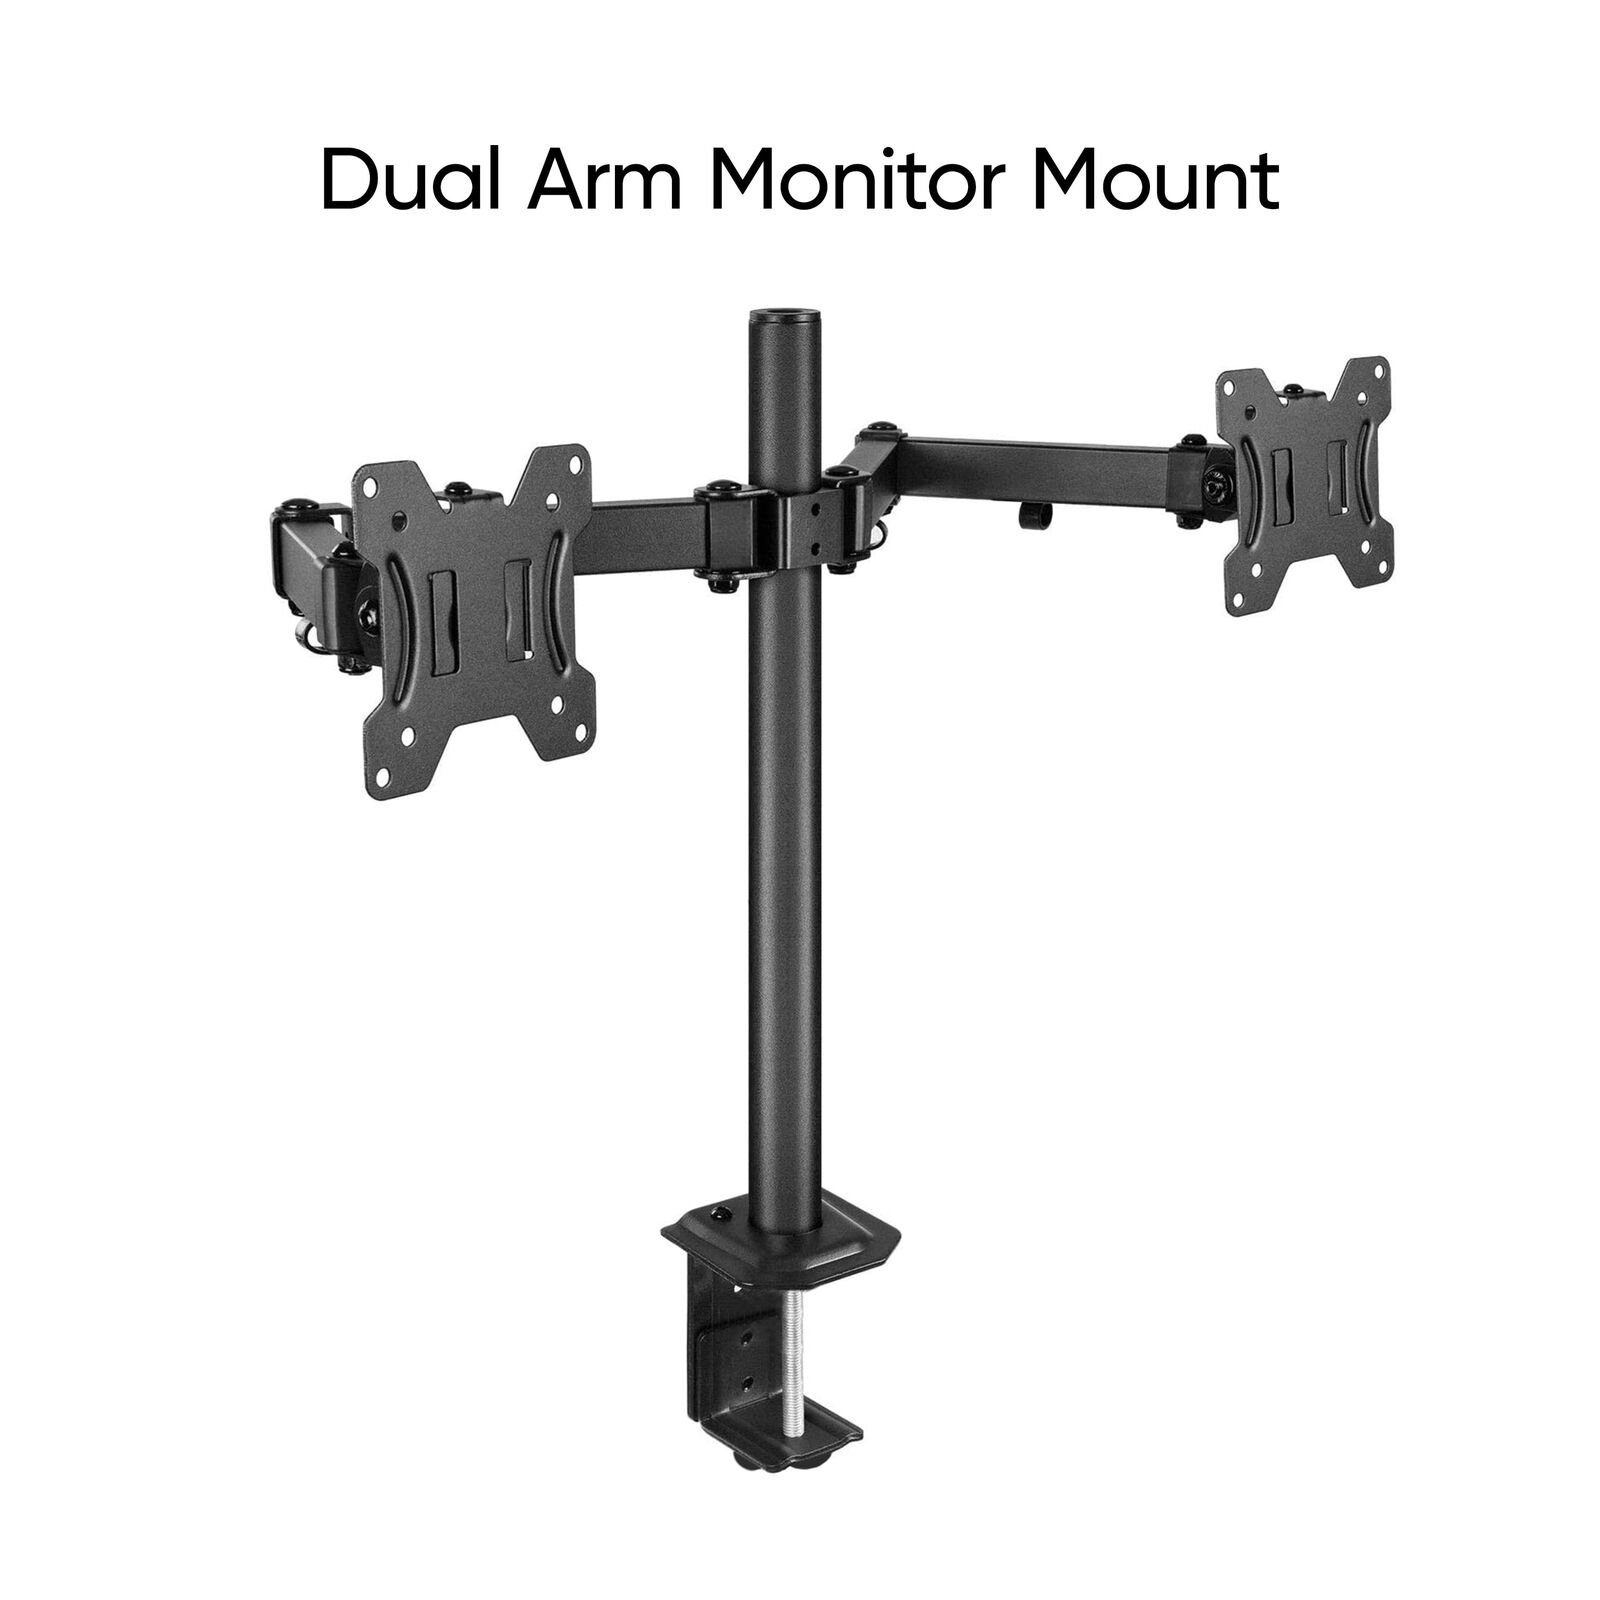 Full Motion Dual Monitor Desk Mount, Fits 2 Screens up to 27 Inches - Rotate, Ti